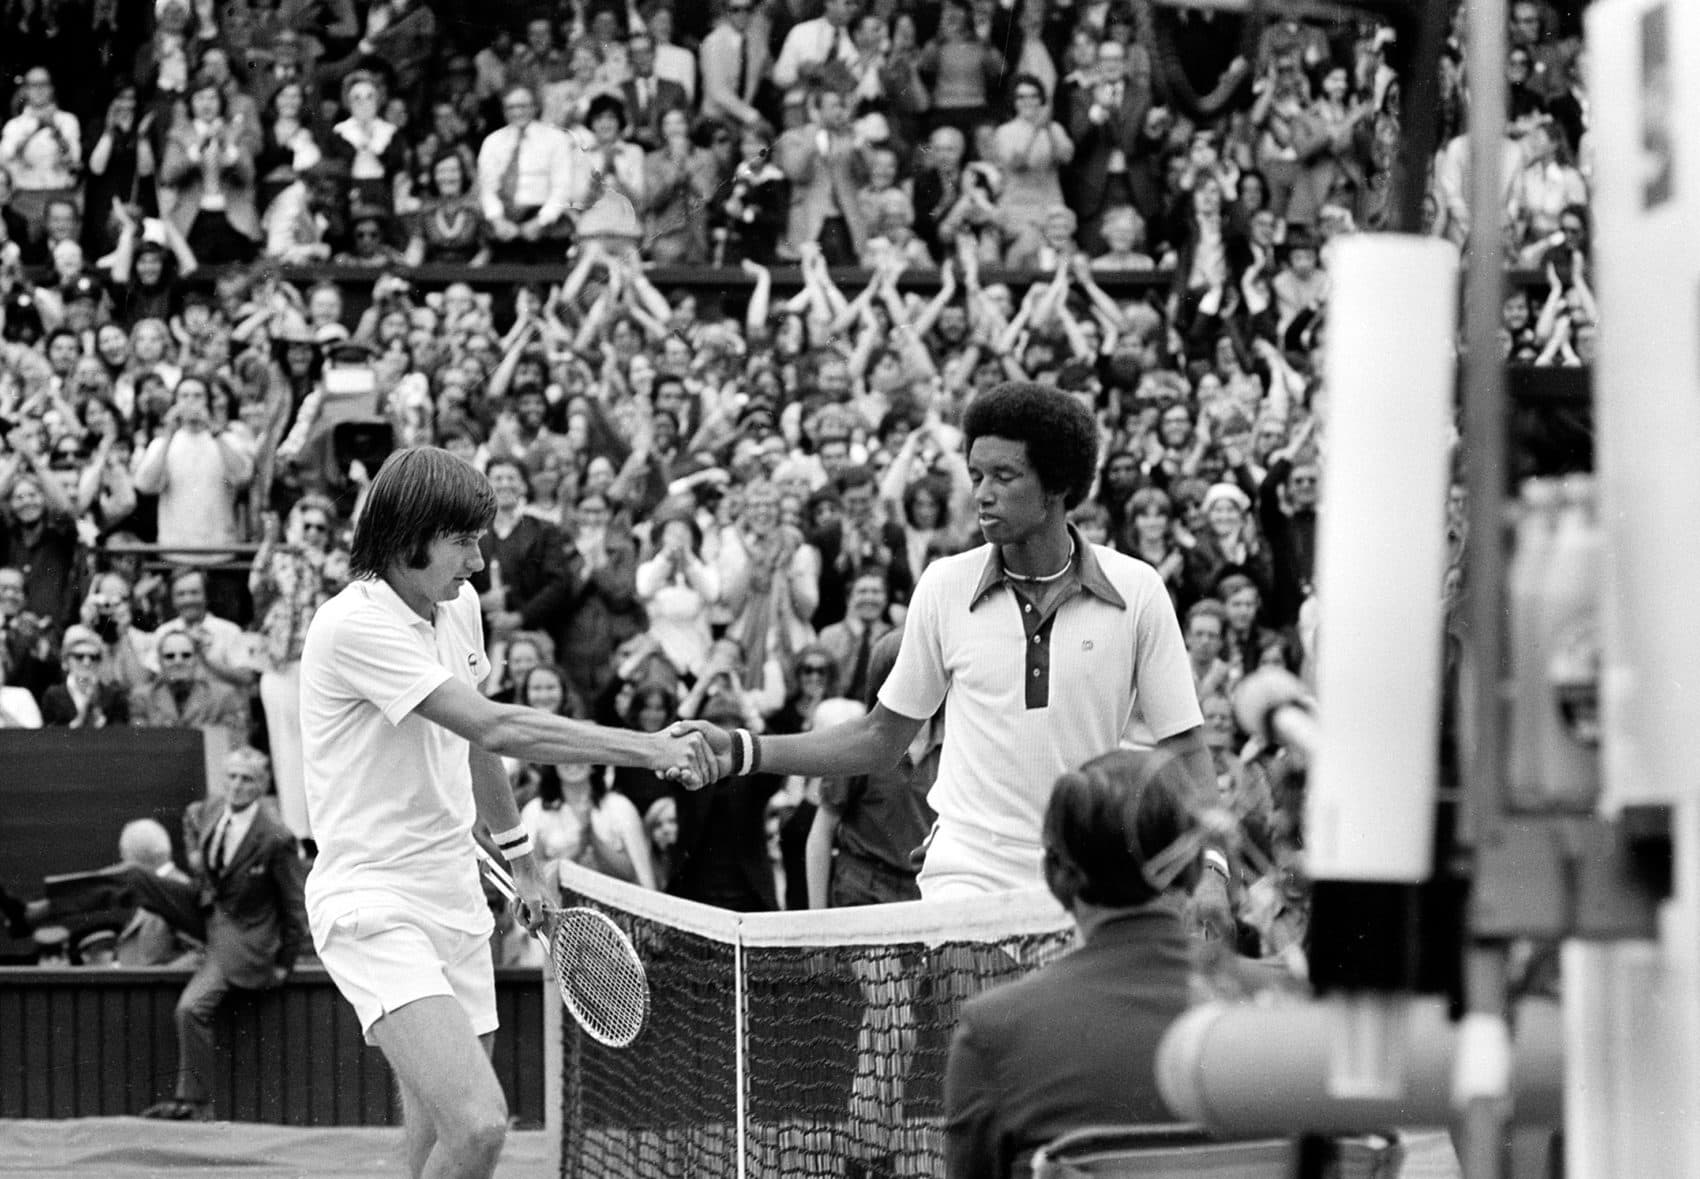 Arthur Ashe and Jimmy Connors clashed in the 1975 Wimbledon men's final. (AP Photo)